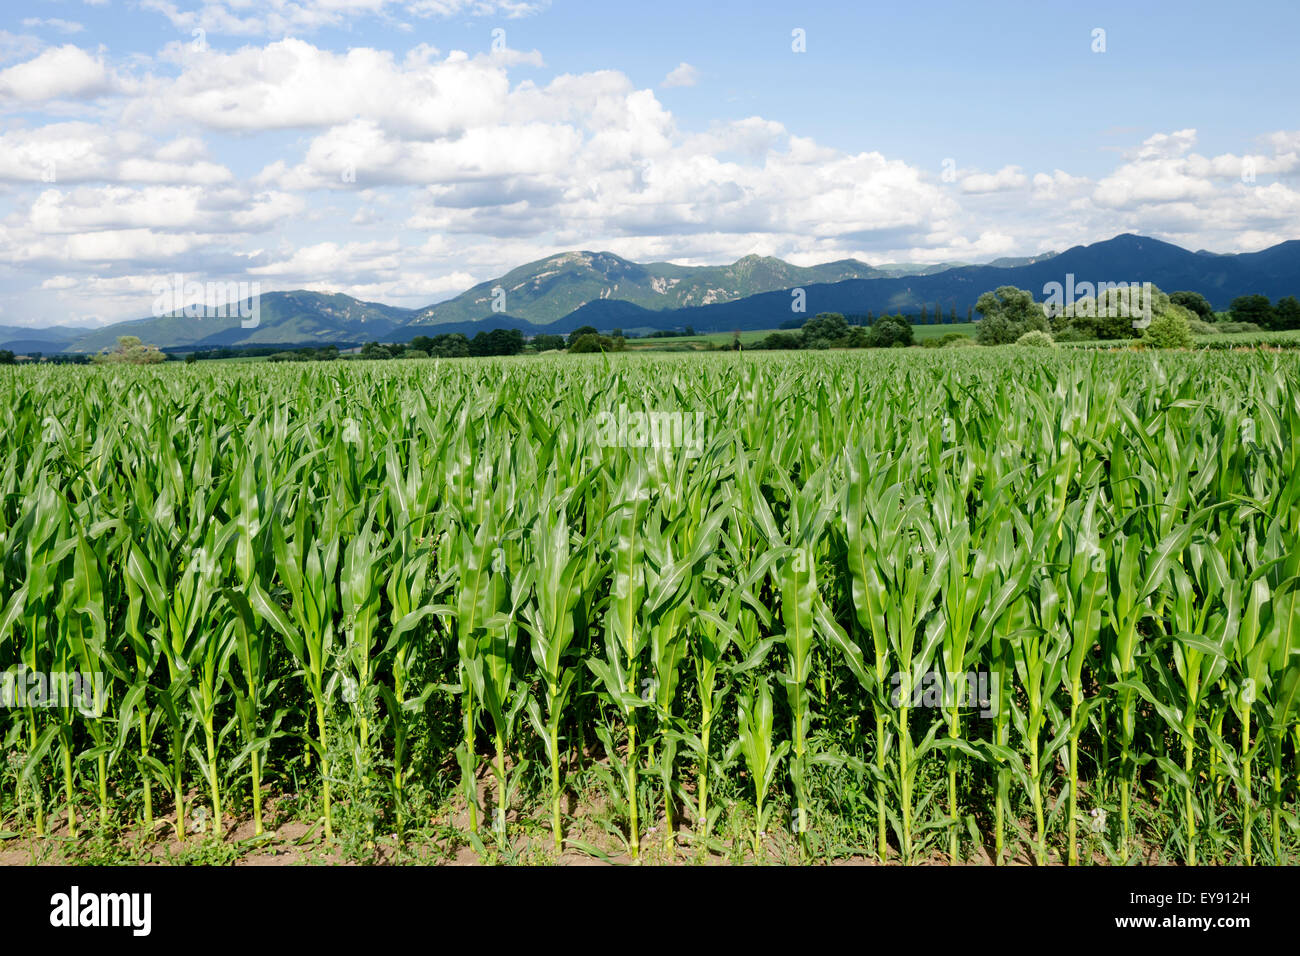 Corn filed with Velka Fatra mountains Stock Photo